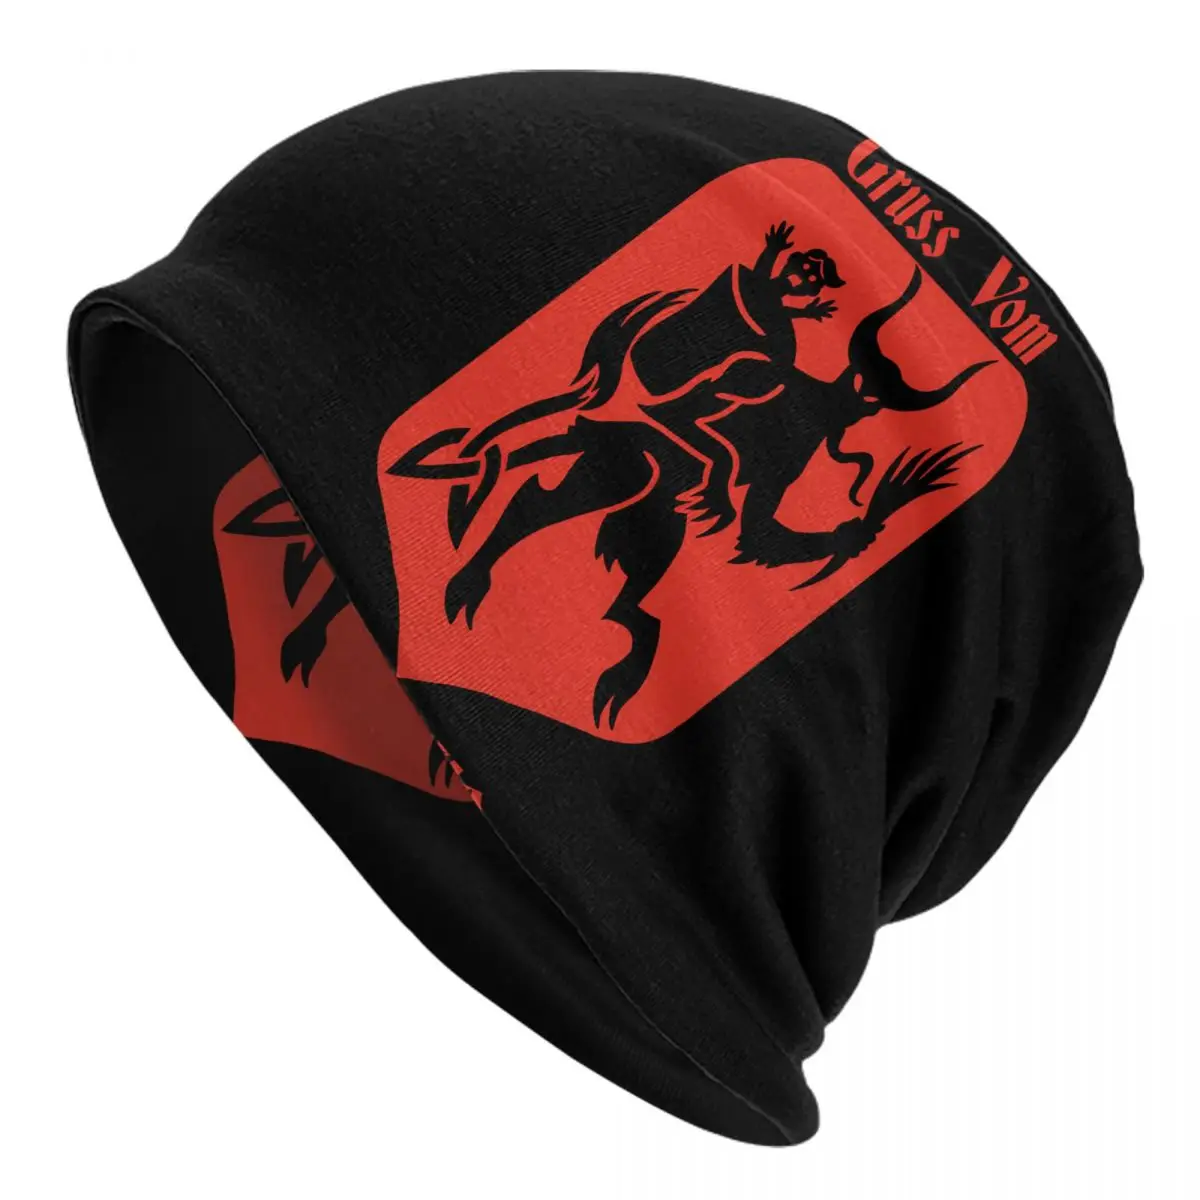 Krampus Is Coming Adult Knit Hat Men's Women's Keep warm winter knitted hat